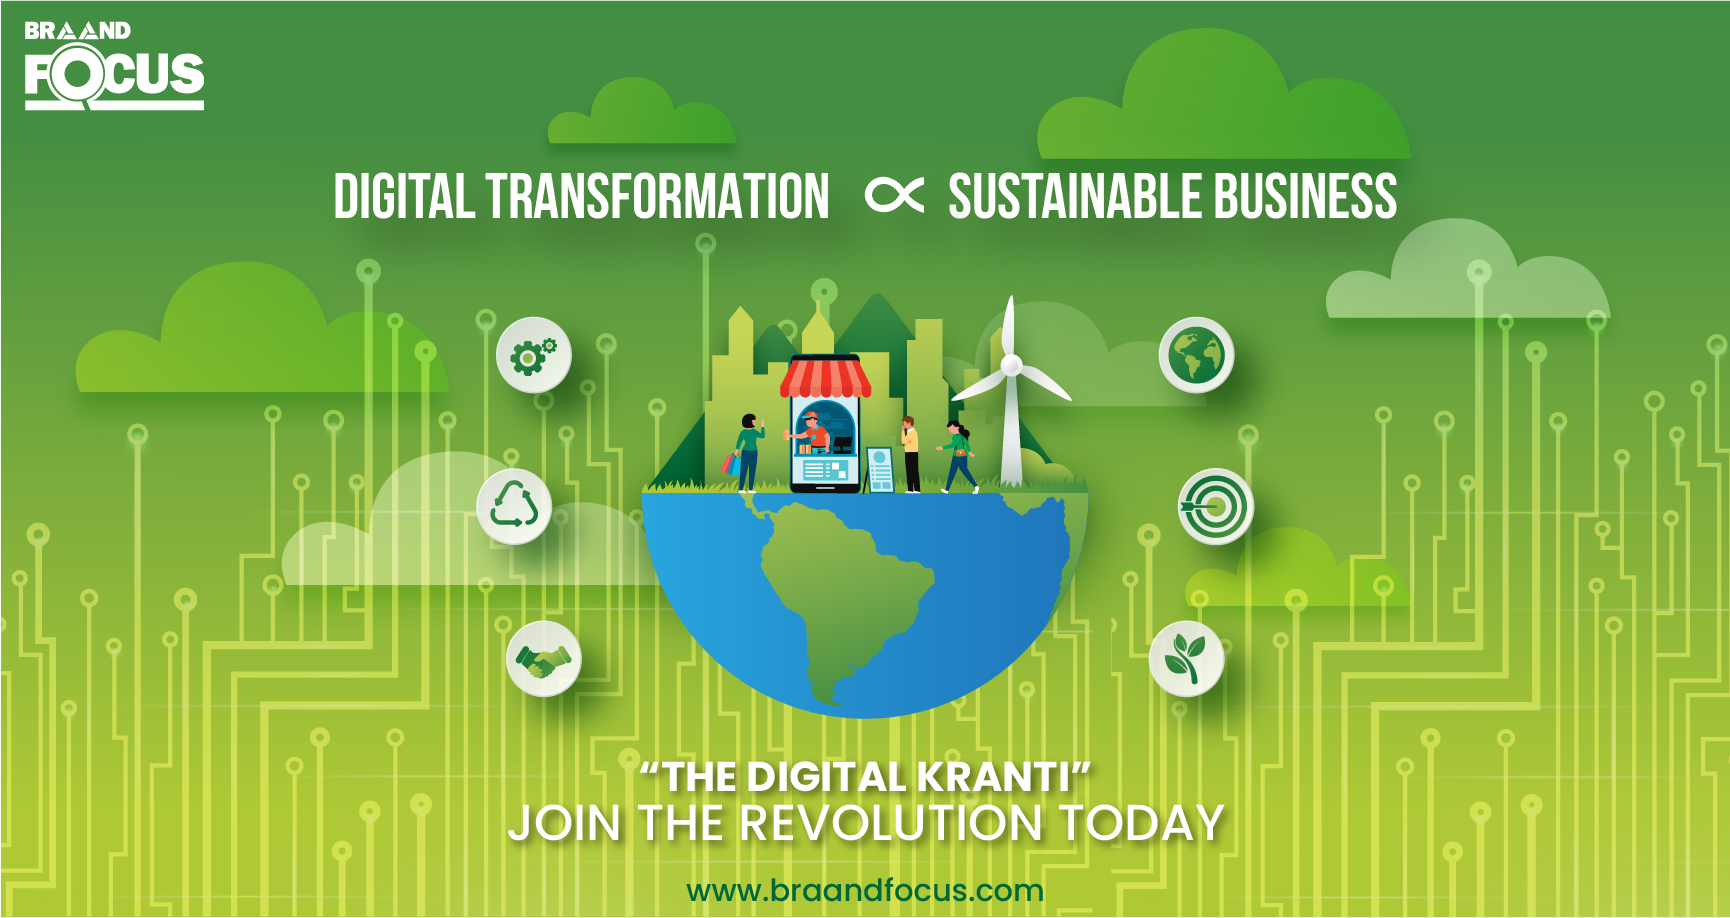 Image showing digital transformation and sustainable business strategies being implemented.